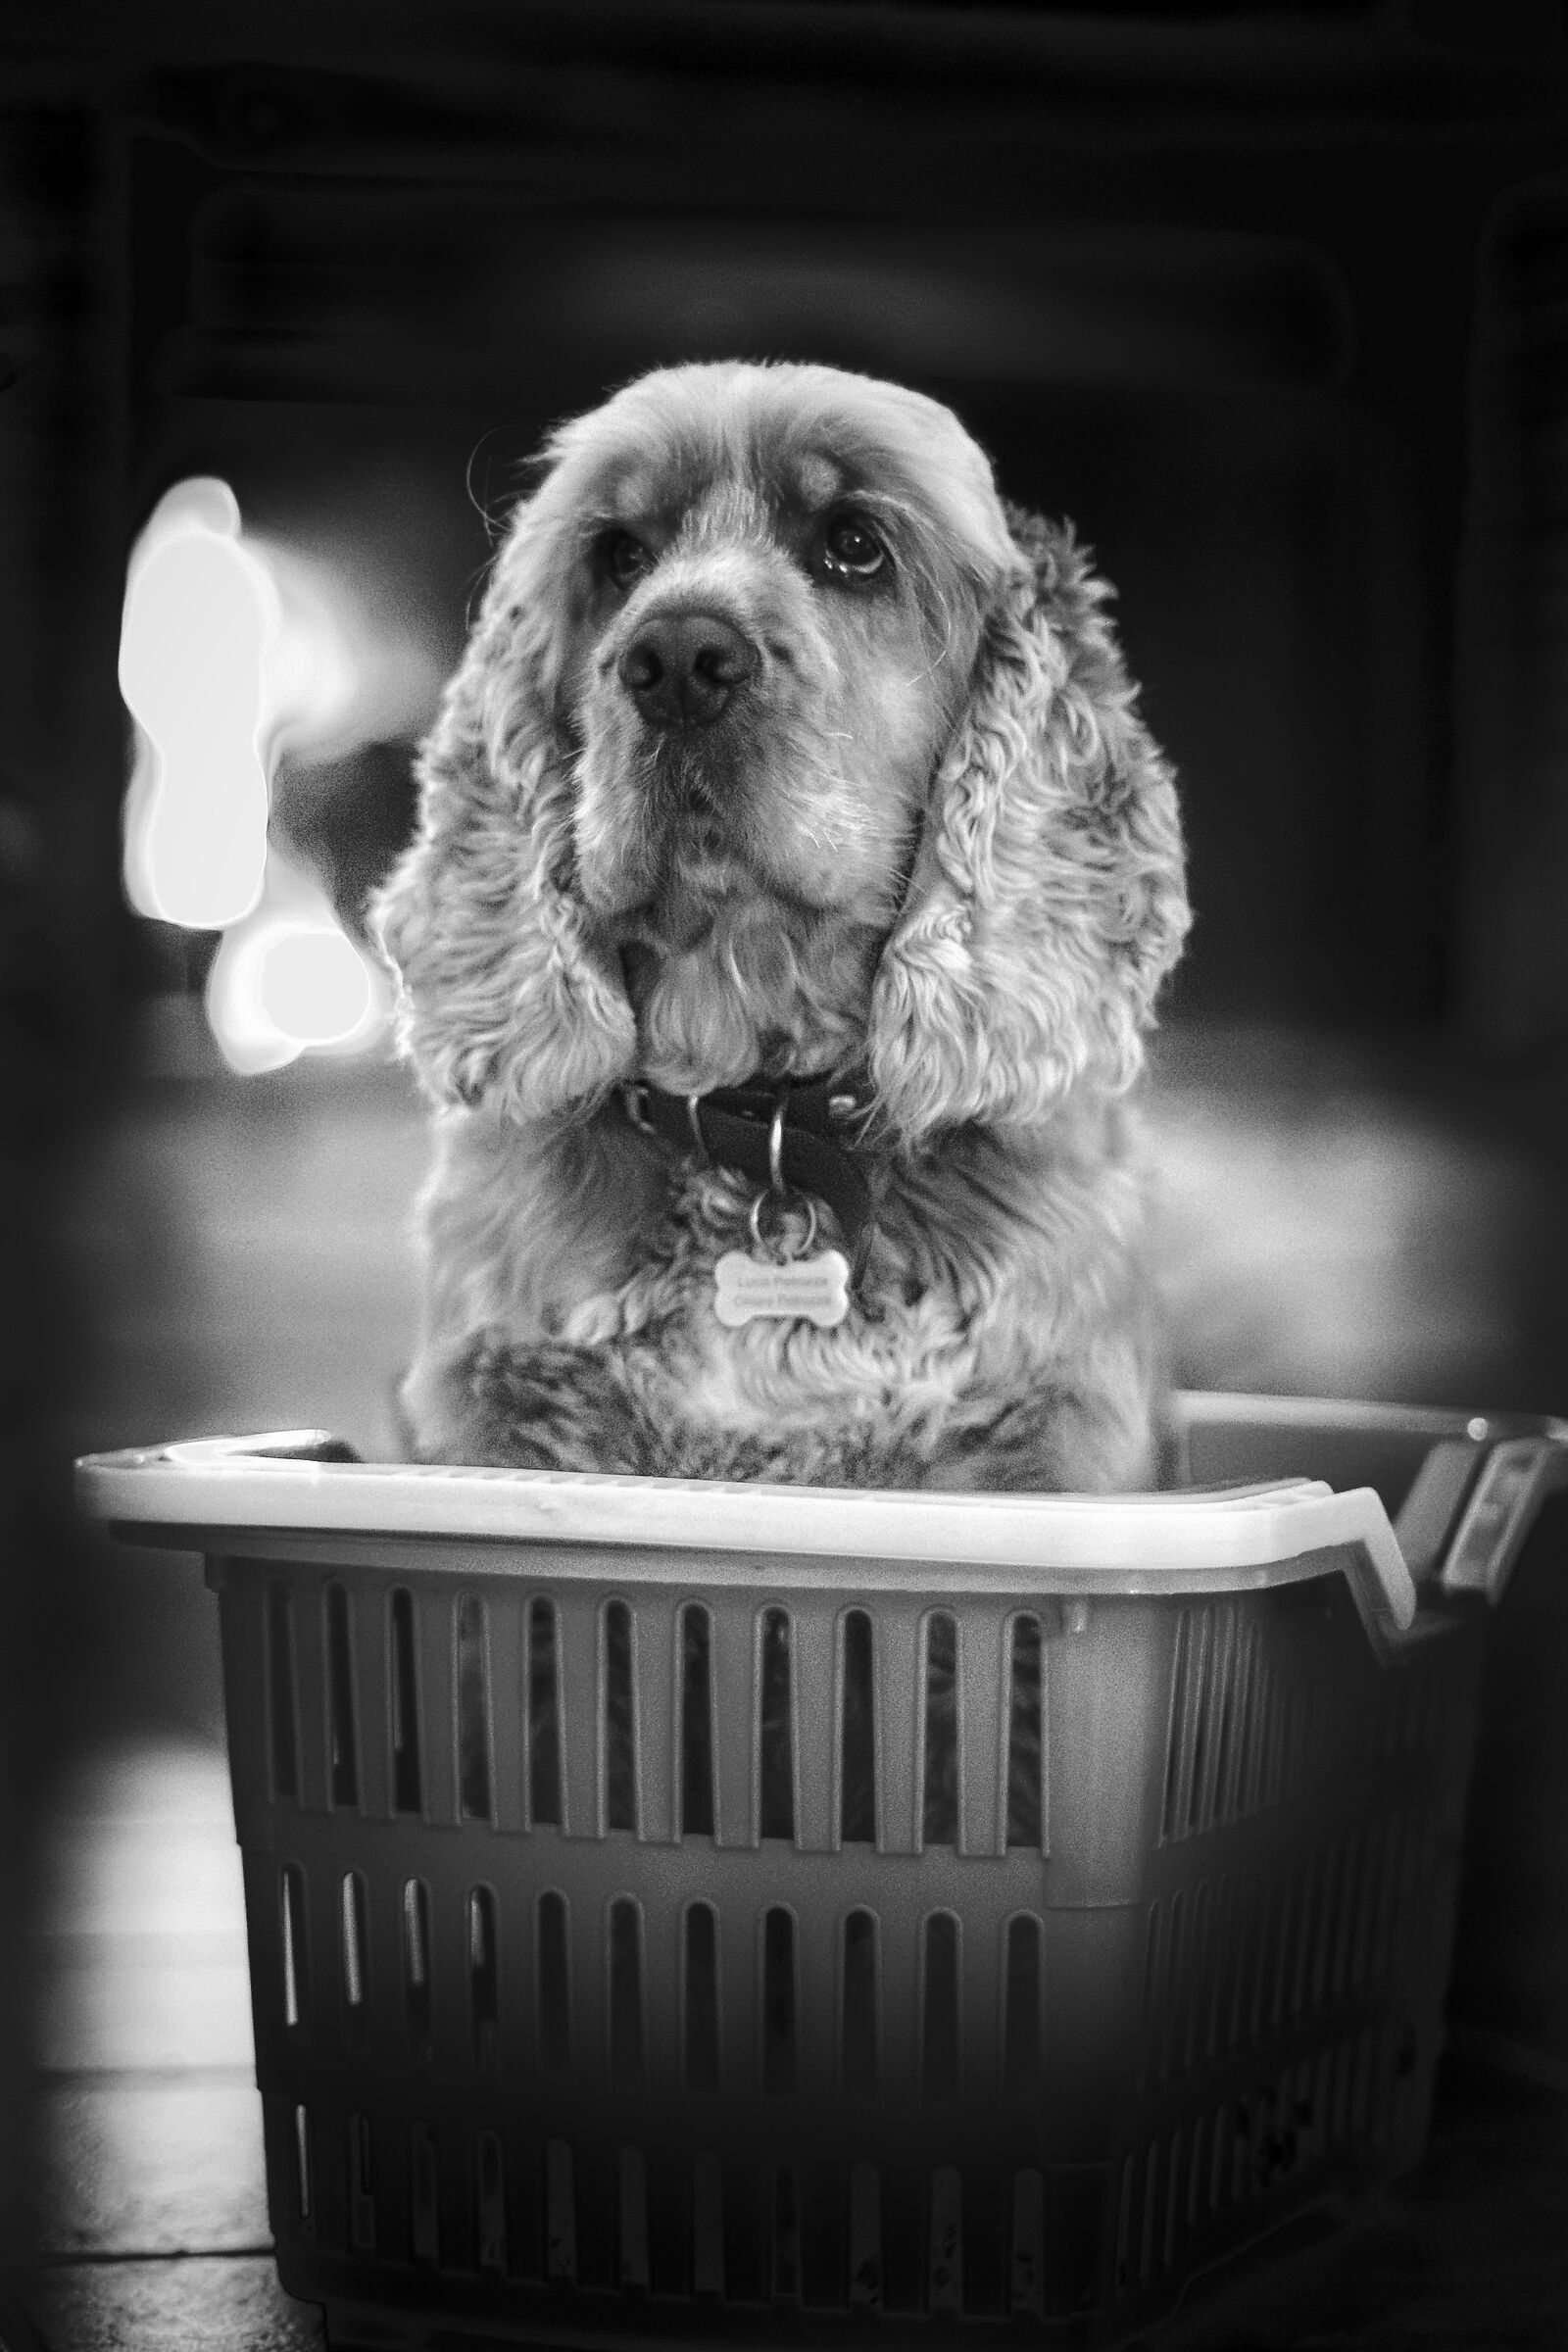 in the basket...